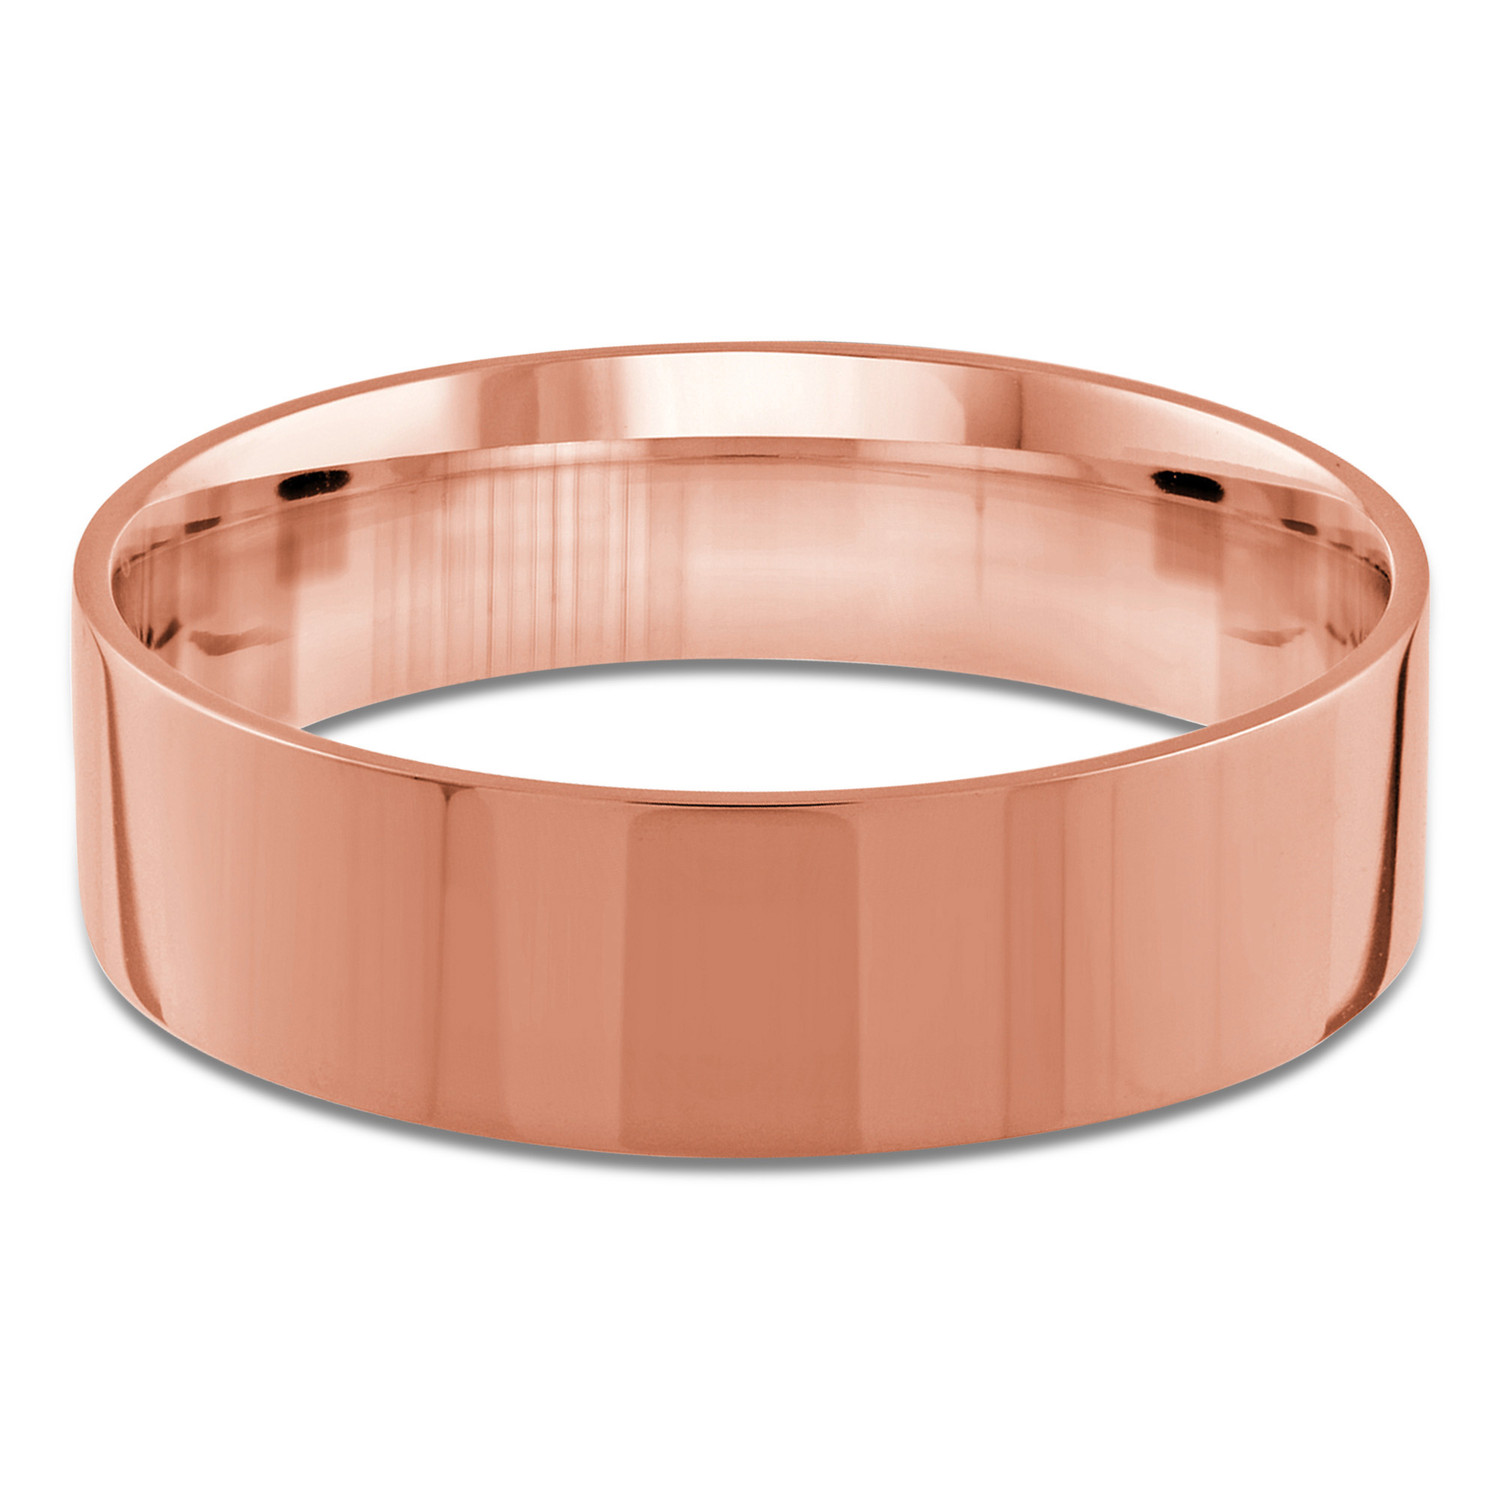 6 MM Classic Mens Wedding Band in Rose Gold (MDVBC0004-6MM-R)